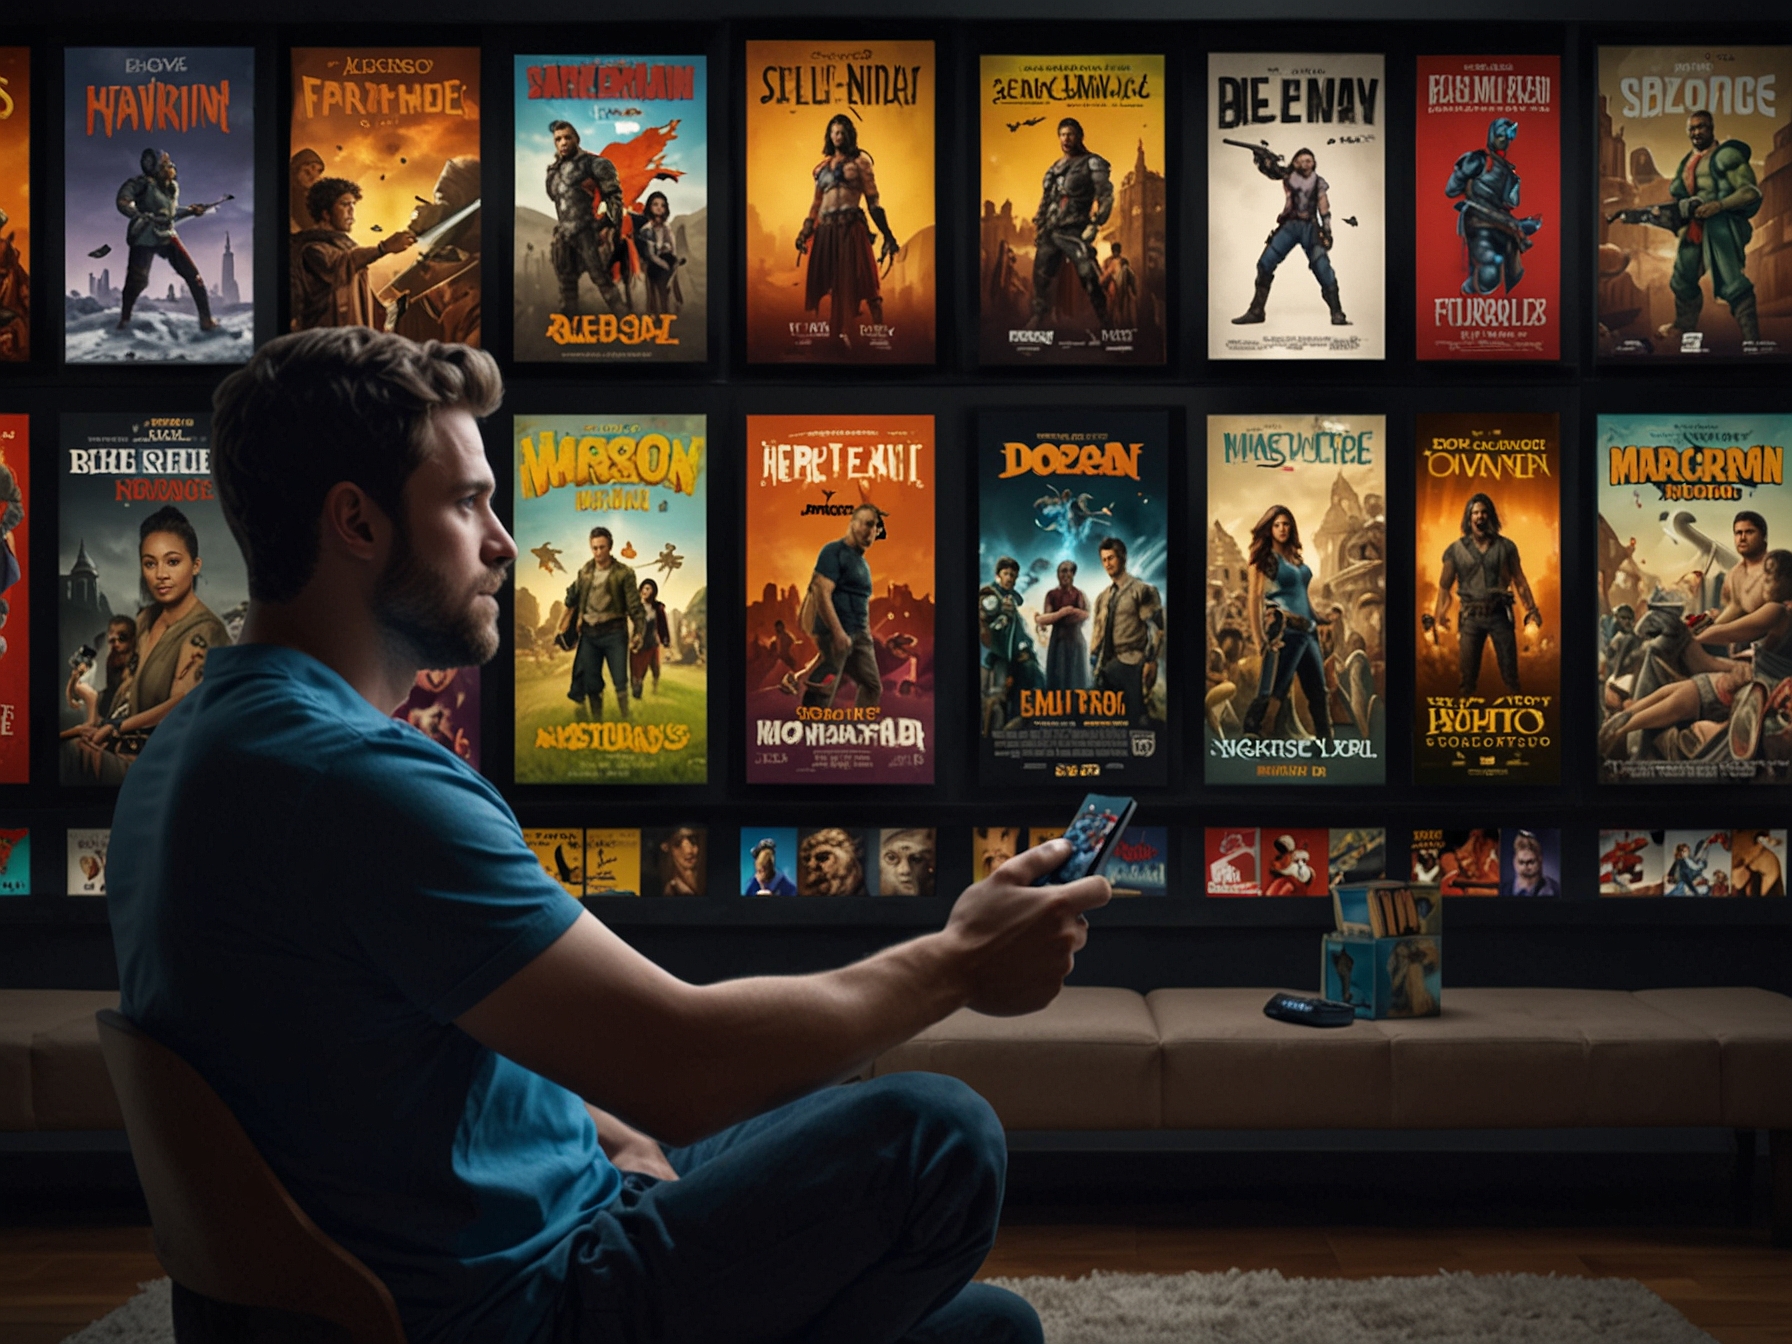 A person holding an Amazon Fire Stick remote, with a TV screen displaying a large selection of movie posters, highlighting the massive library available with the app.